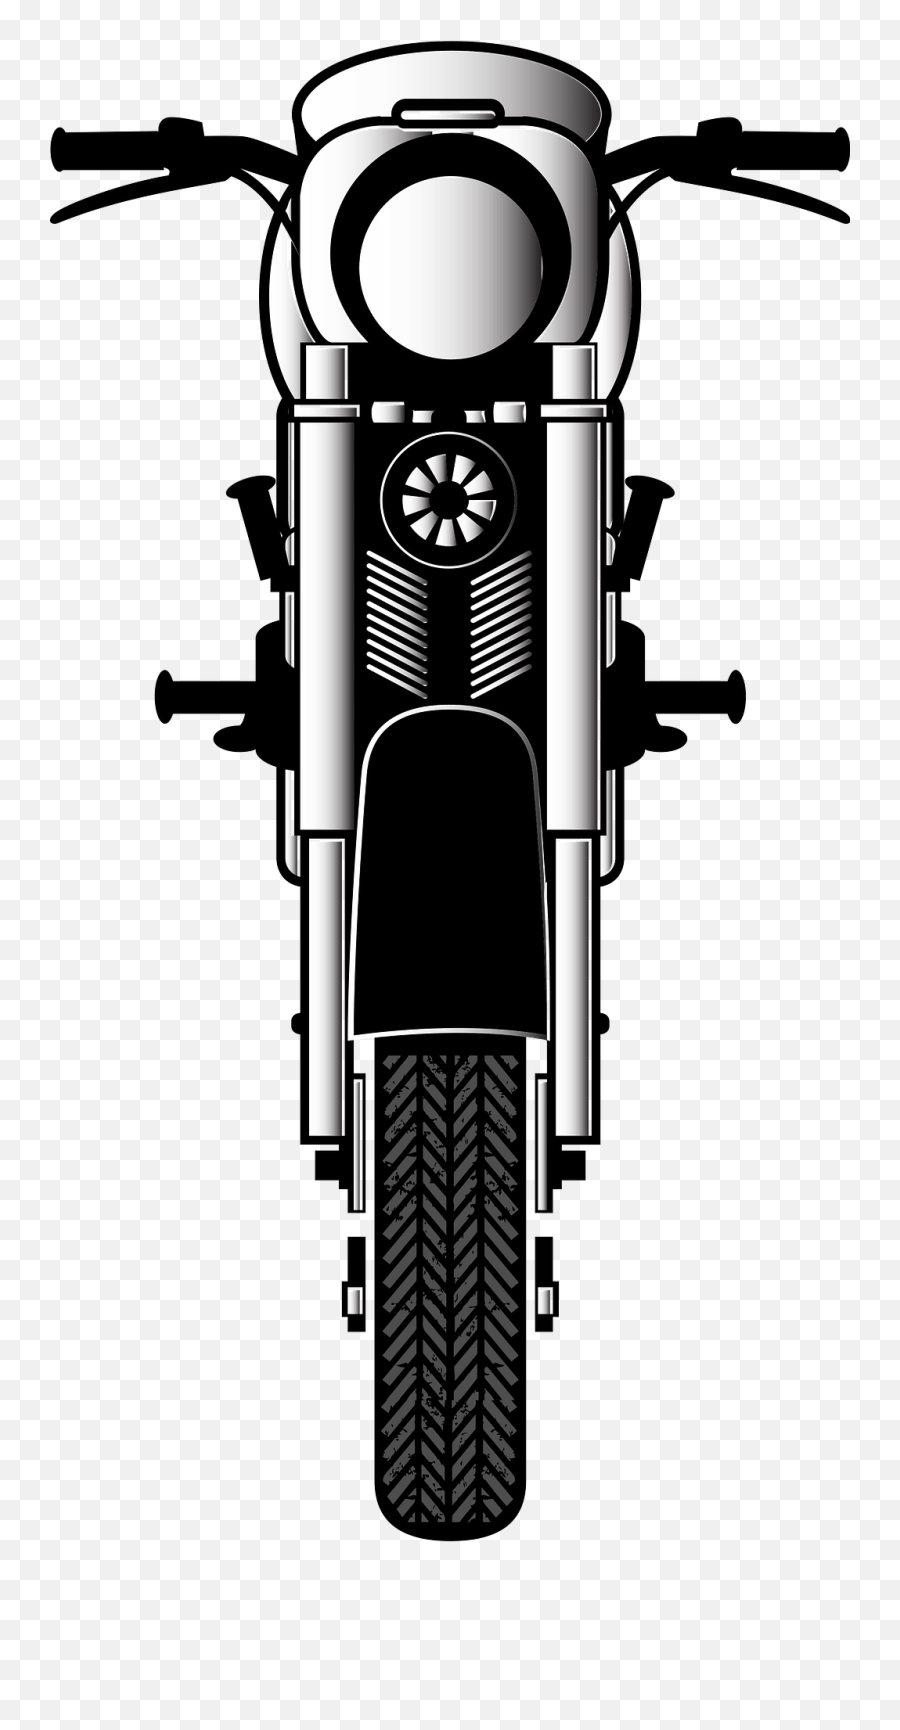 Motorbike Clipart - Motorbike Cliparts Emoji,Motorcycle Clipart Black And White